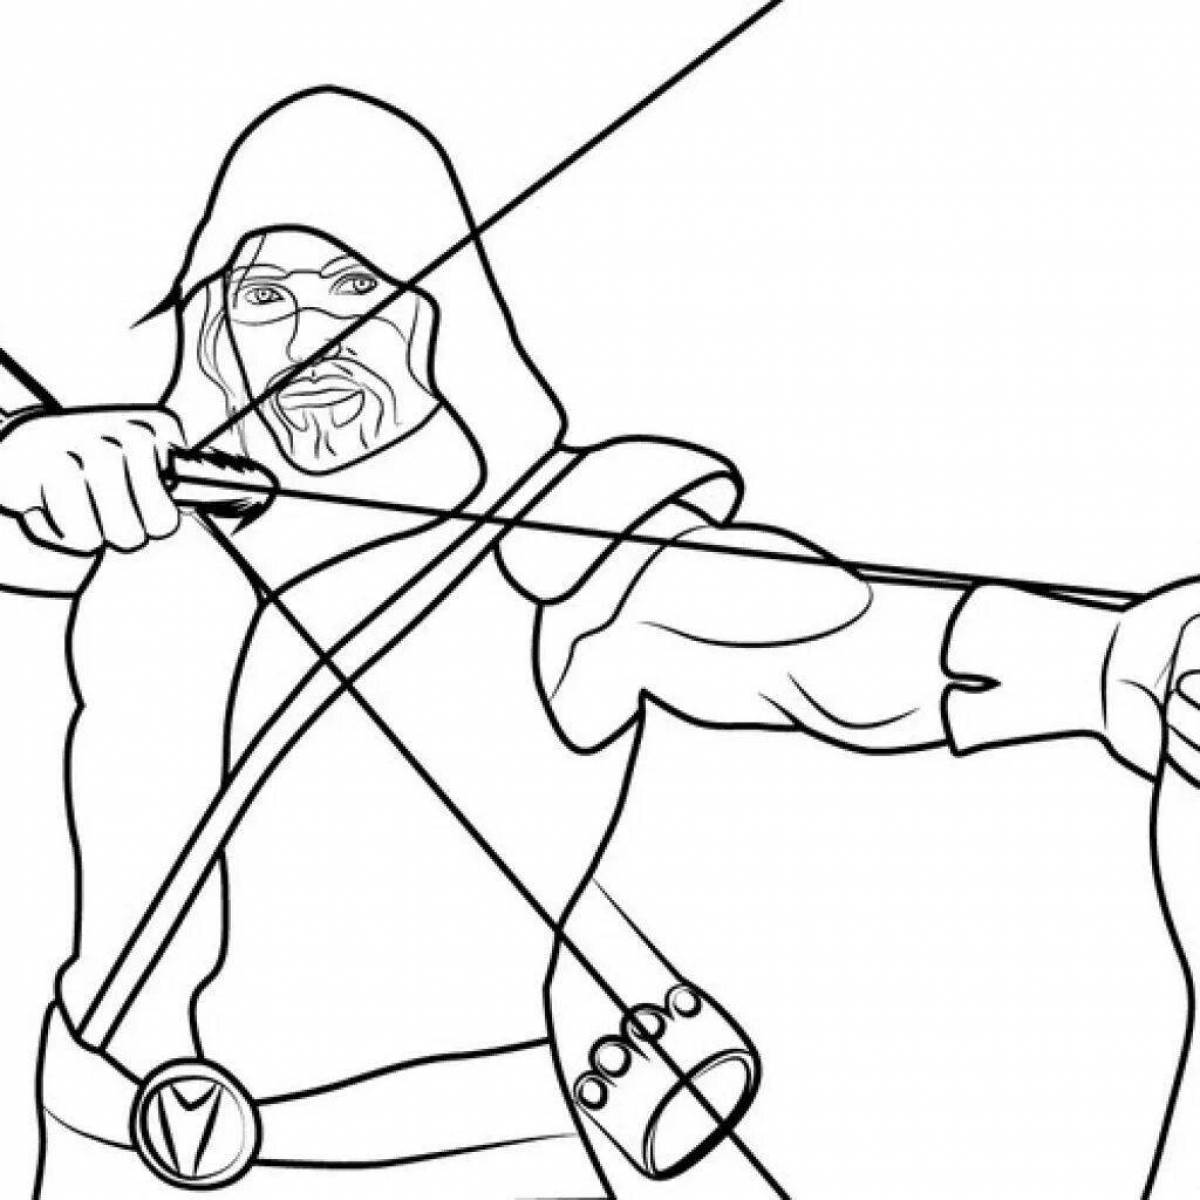 Artistic archer coloring page